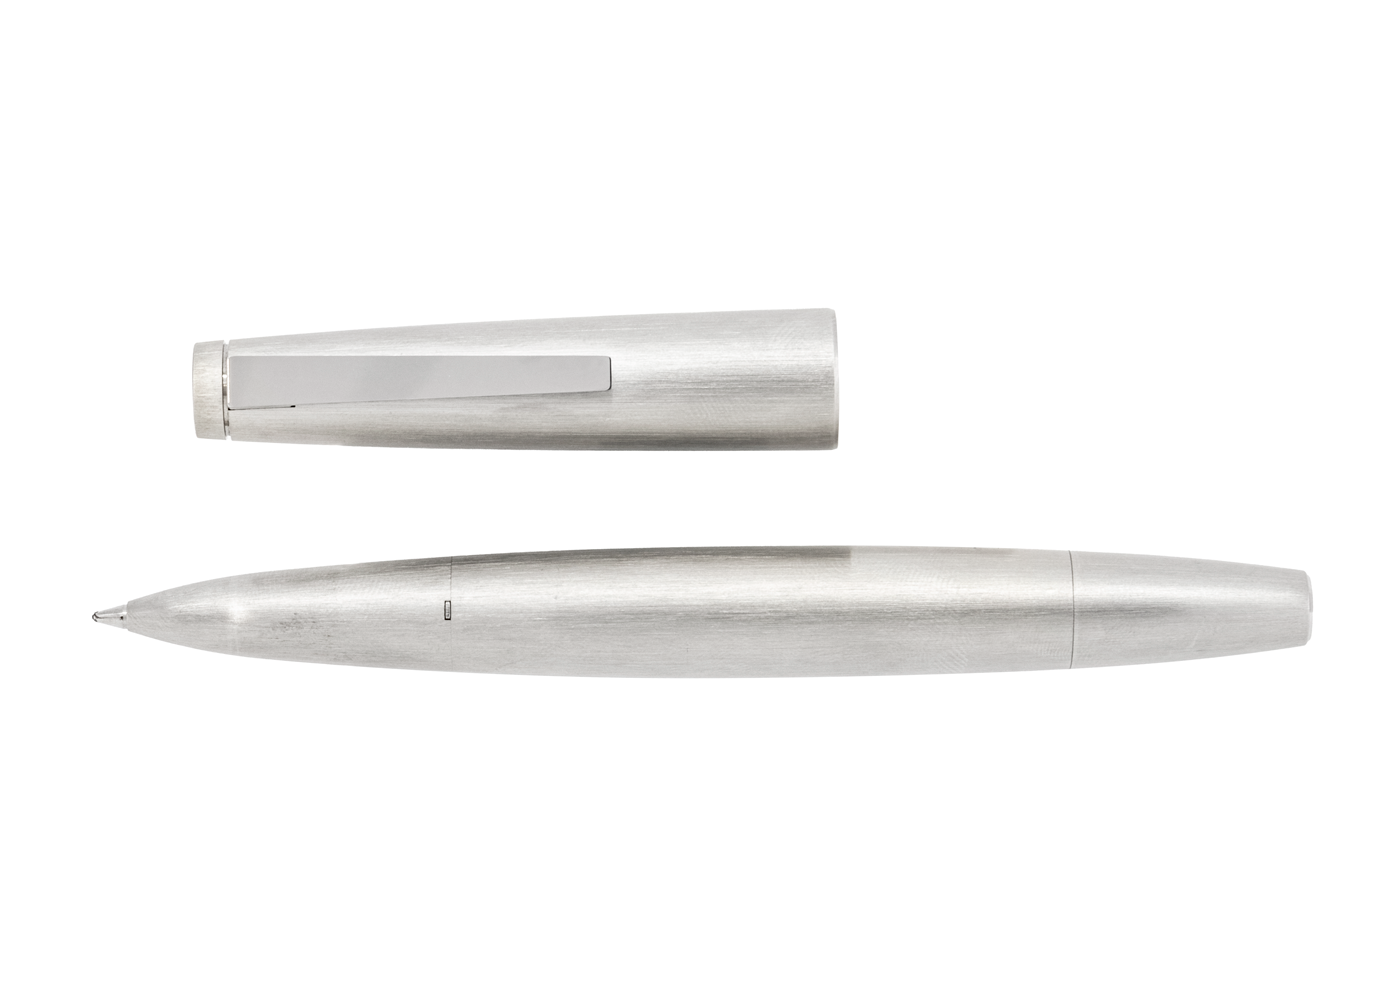 Lamy 2000 Rollerball Medium Point - Stainless steel silver